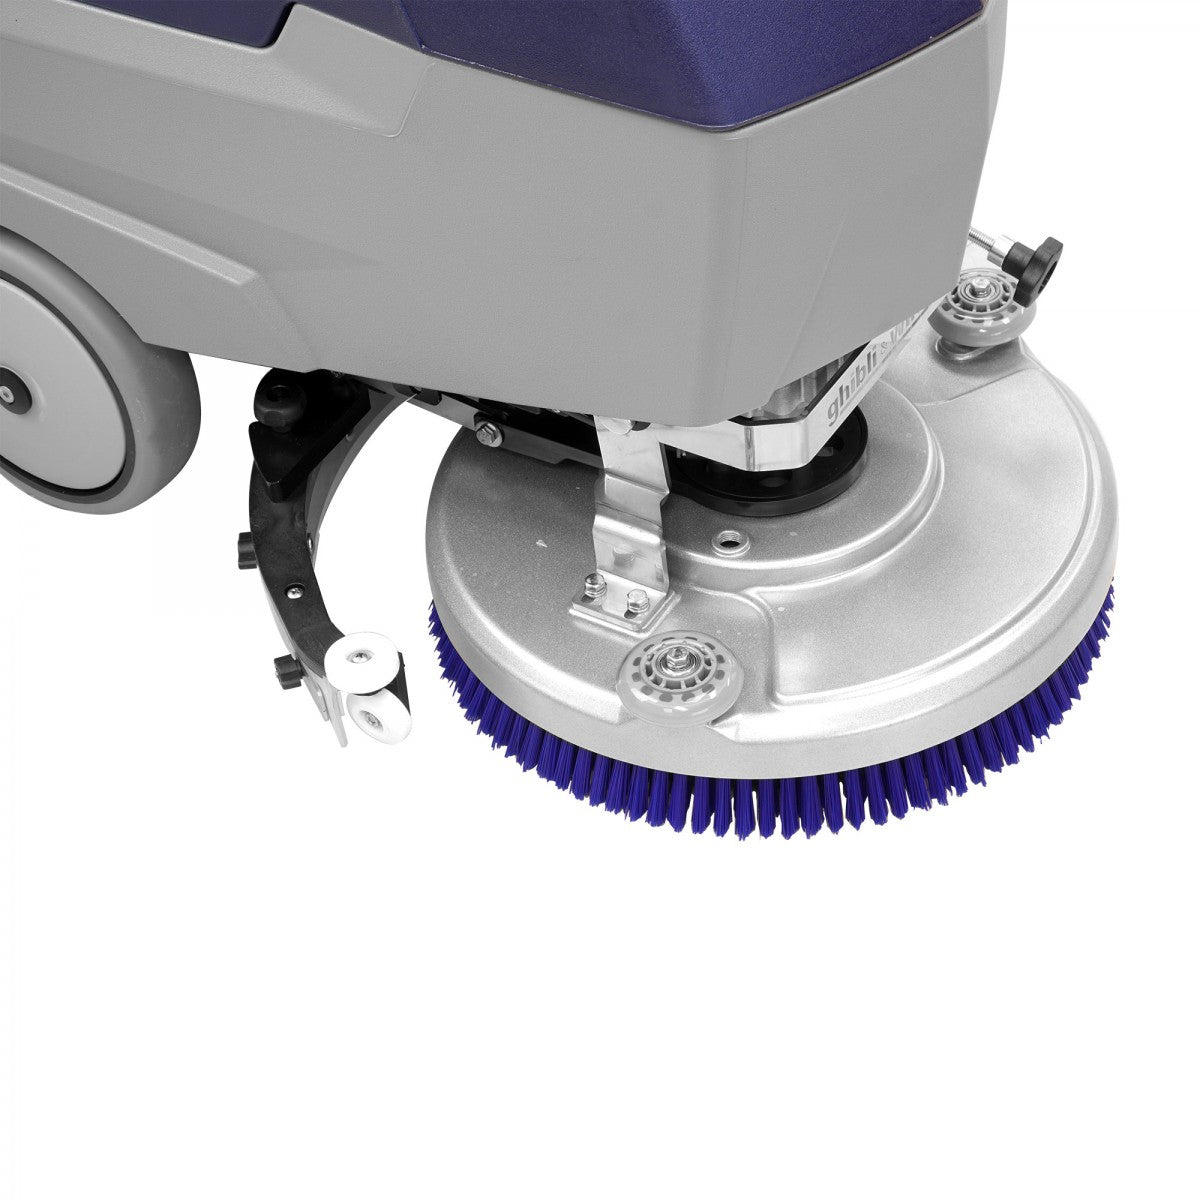 Johnny Vac / Ghibli Autoscrubber 120V - 15’ (385 mm) Cleaning Path Ride - On & Scrubbers